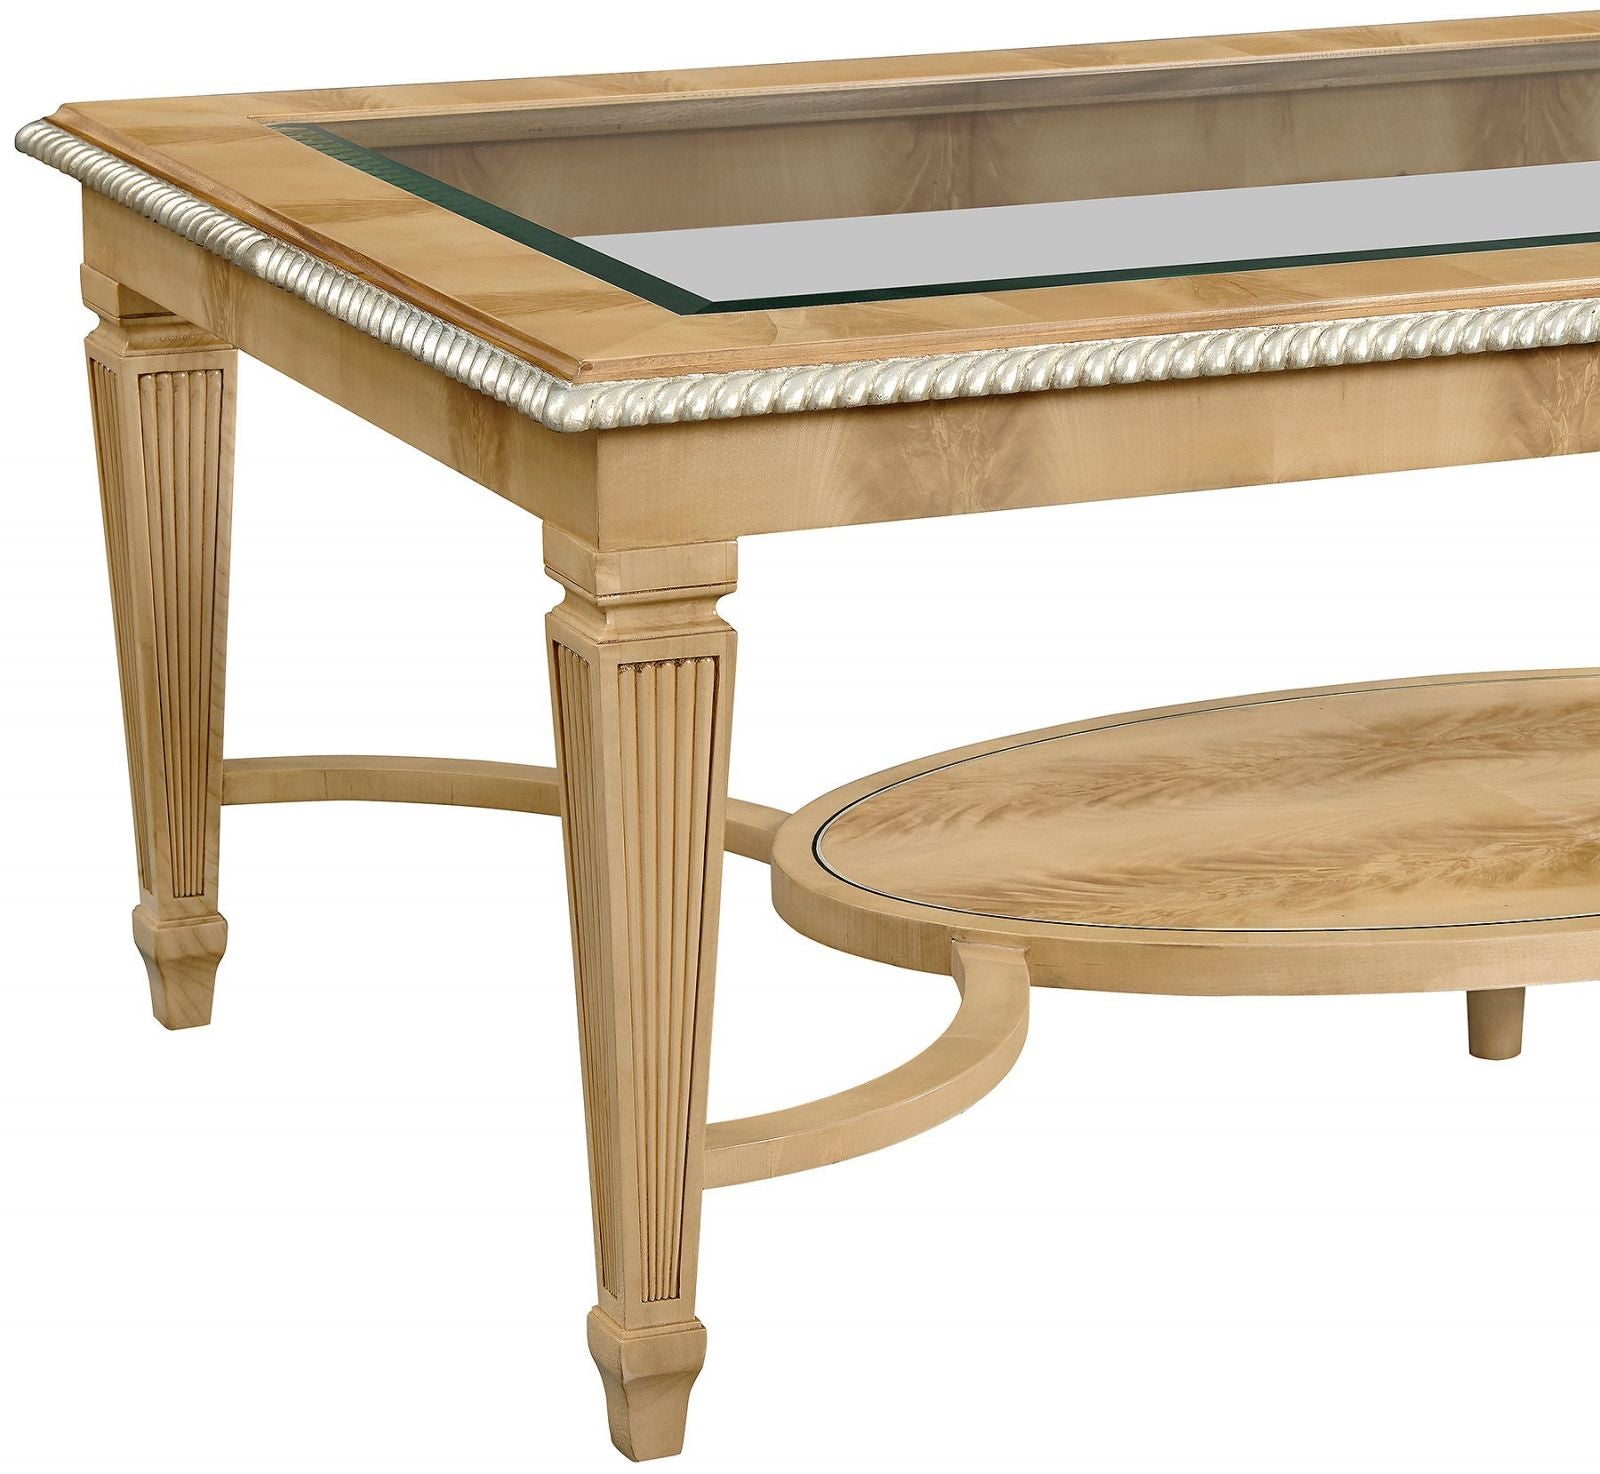 Exquisite Crotch Sycamore coffee Table with Glass Top | Natural Wood Design